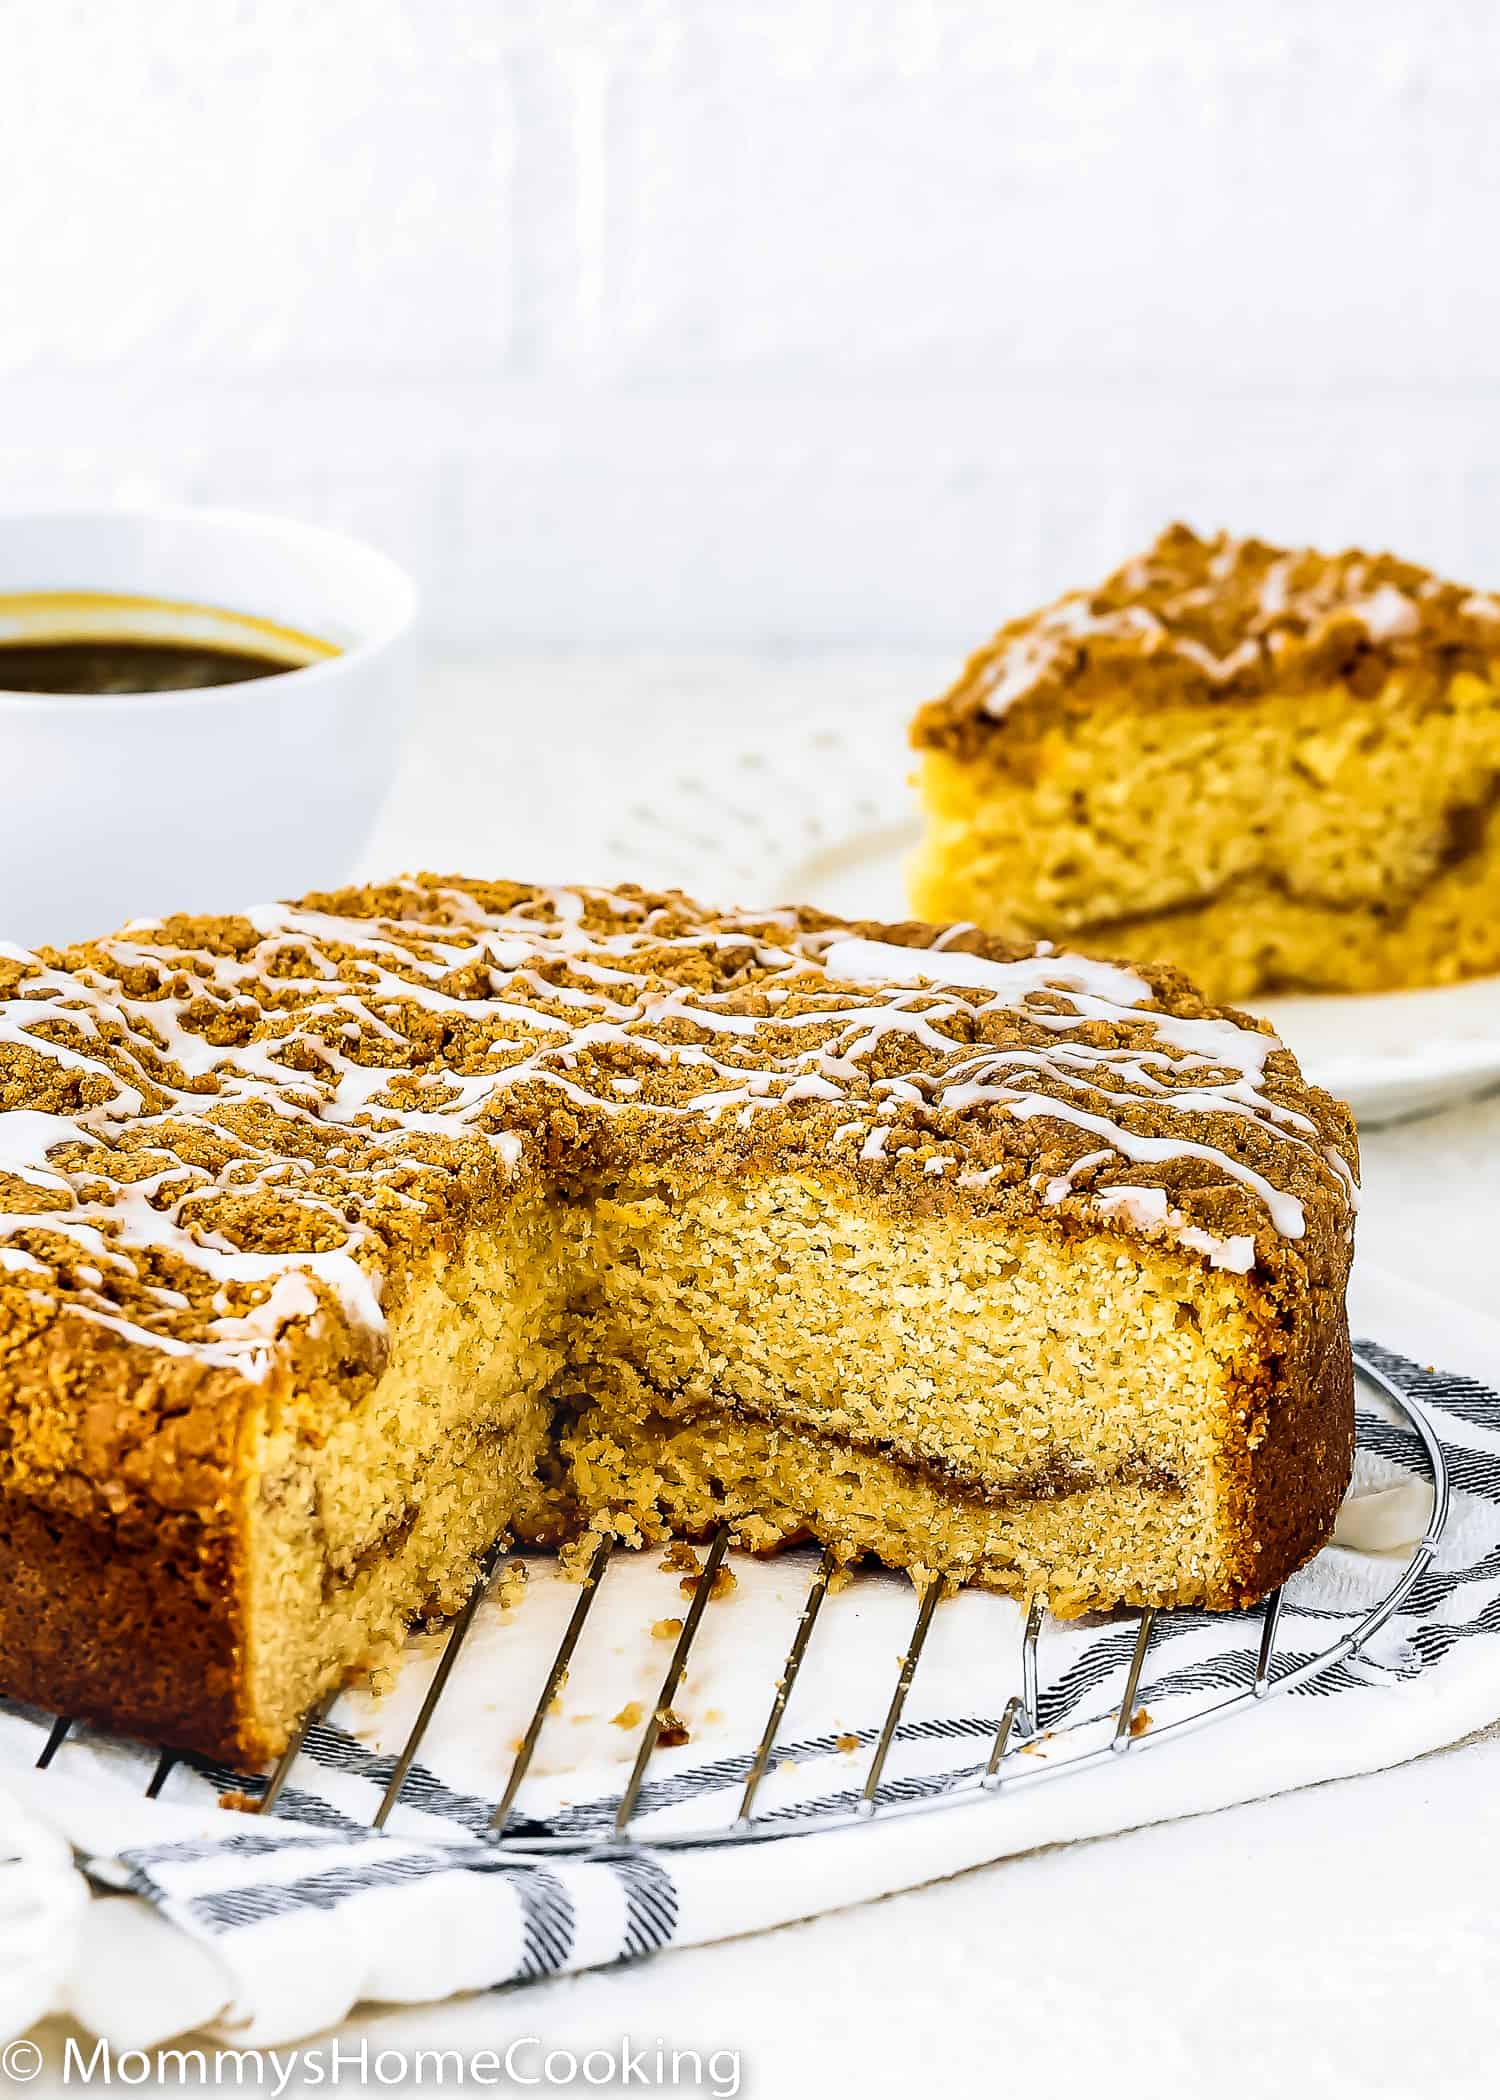 Easy Eggless Coffee Cake Mommy's Home Cooking